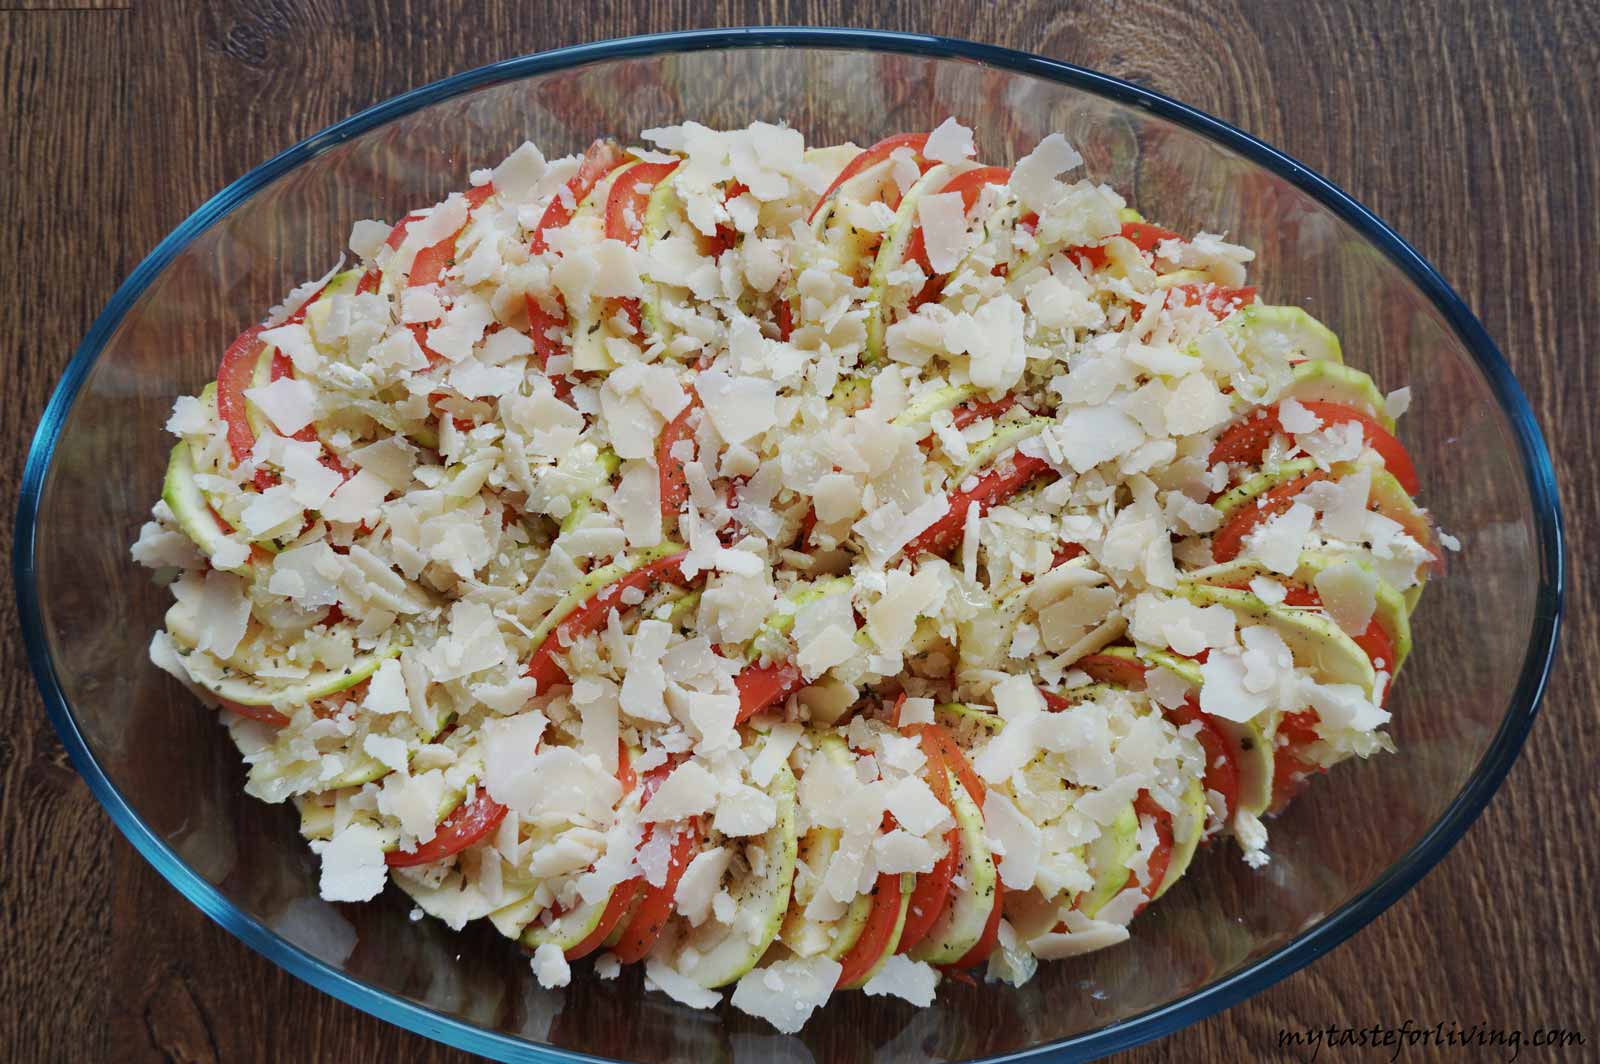 Favorite summer dish! The combination of zucchini and tomatoes is great, and their taste is complemented by adding cheese and cheddar. With the aroma of onion, garlic, basil and parmesan - the dish becomes indescribably delicious.